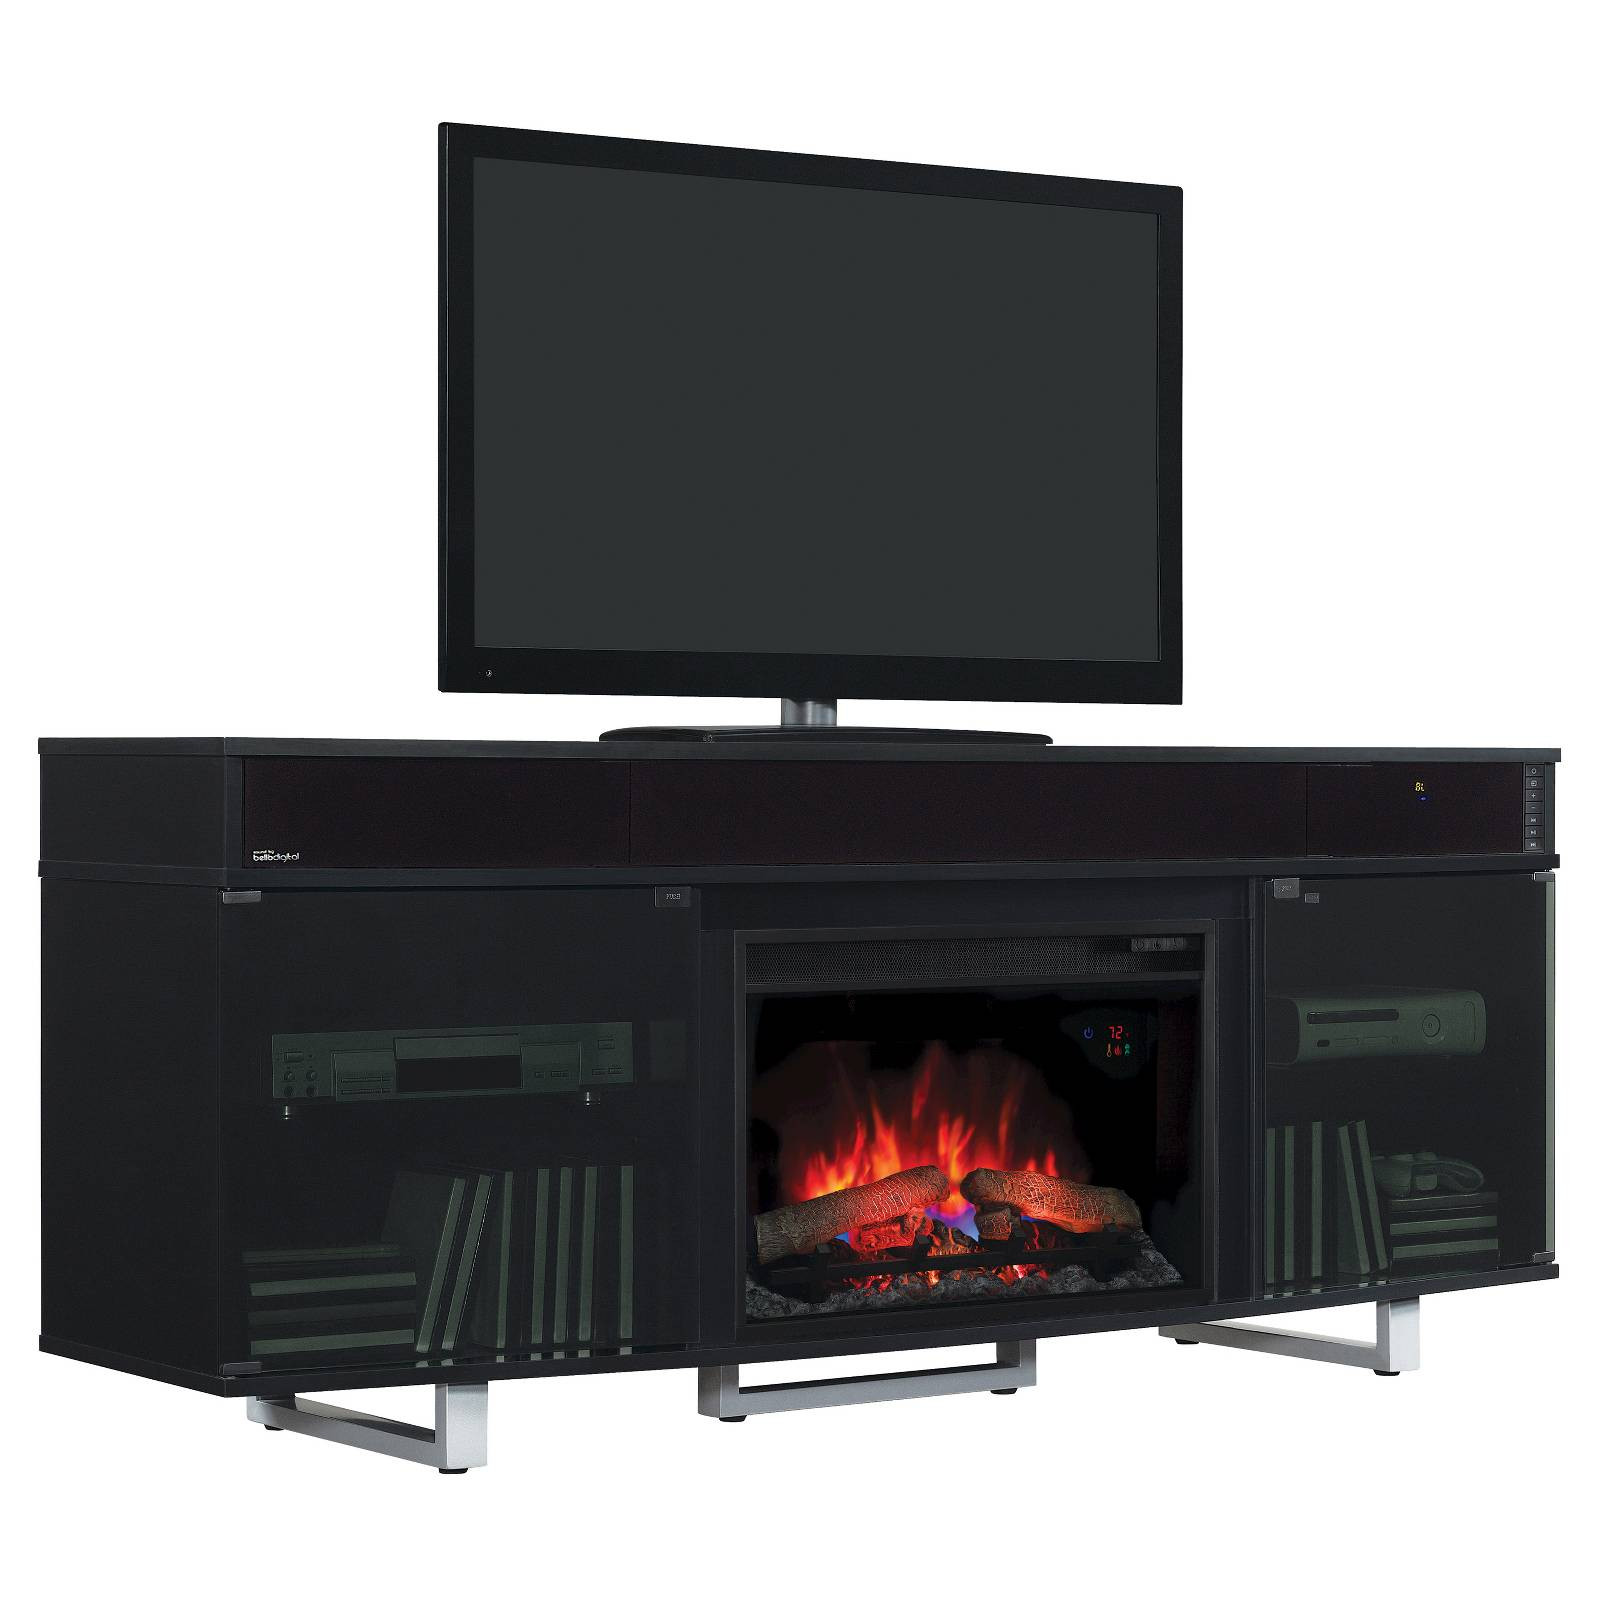 Electric Fireplace With Speakers
 Enterprise TV Stand with Speakers and Electric Fireplace